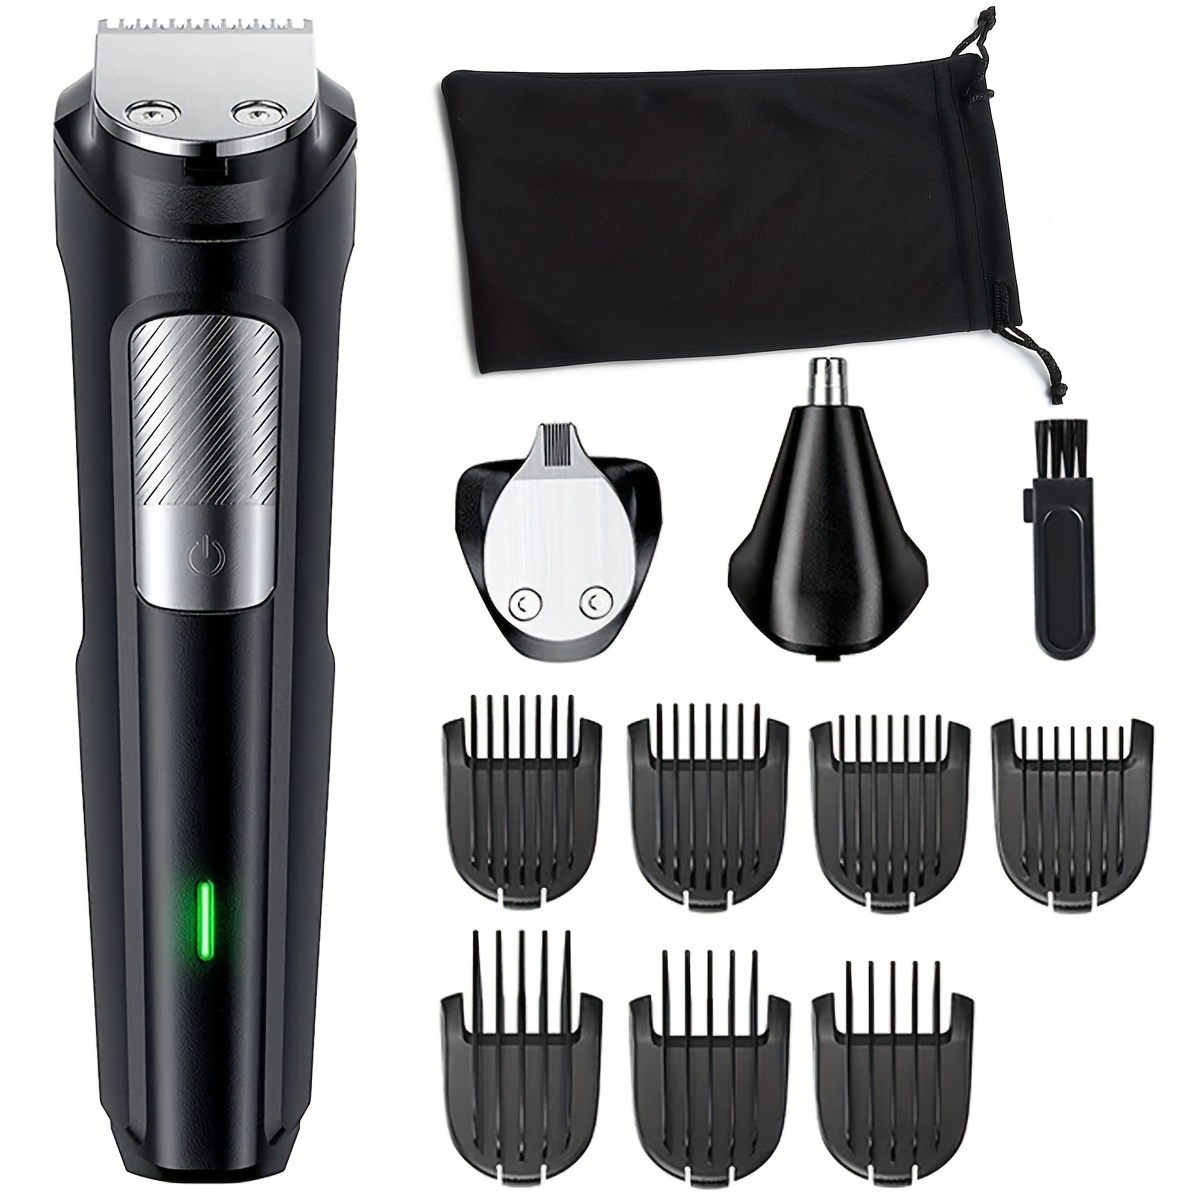 

Beard Trimmer Hair Clipper For Men, Multigroomer All-in-one Trimmer, 10 Piece Mens Grooming Kit, For Beard, Face, Nose, And Ear Hair Trimmer And Hair Clipper, No Blade Oil Needed